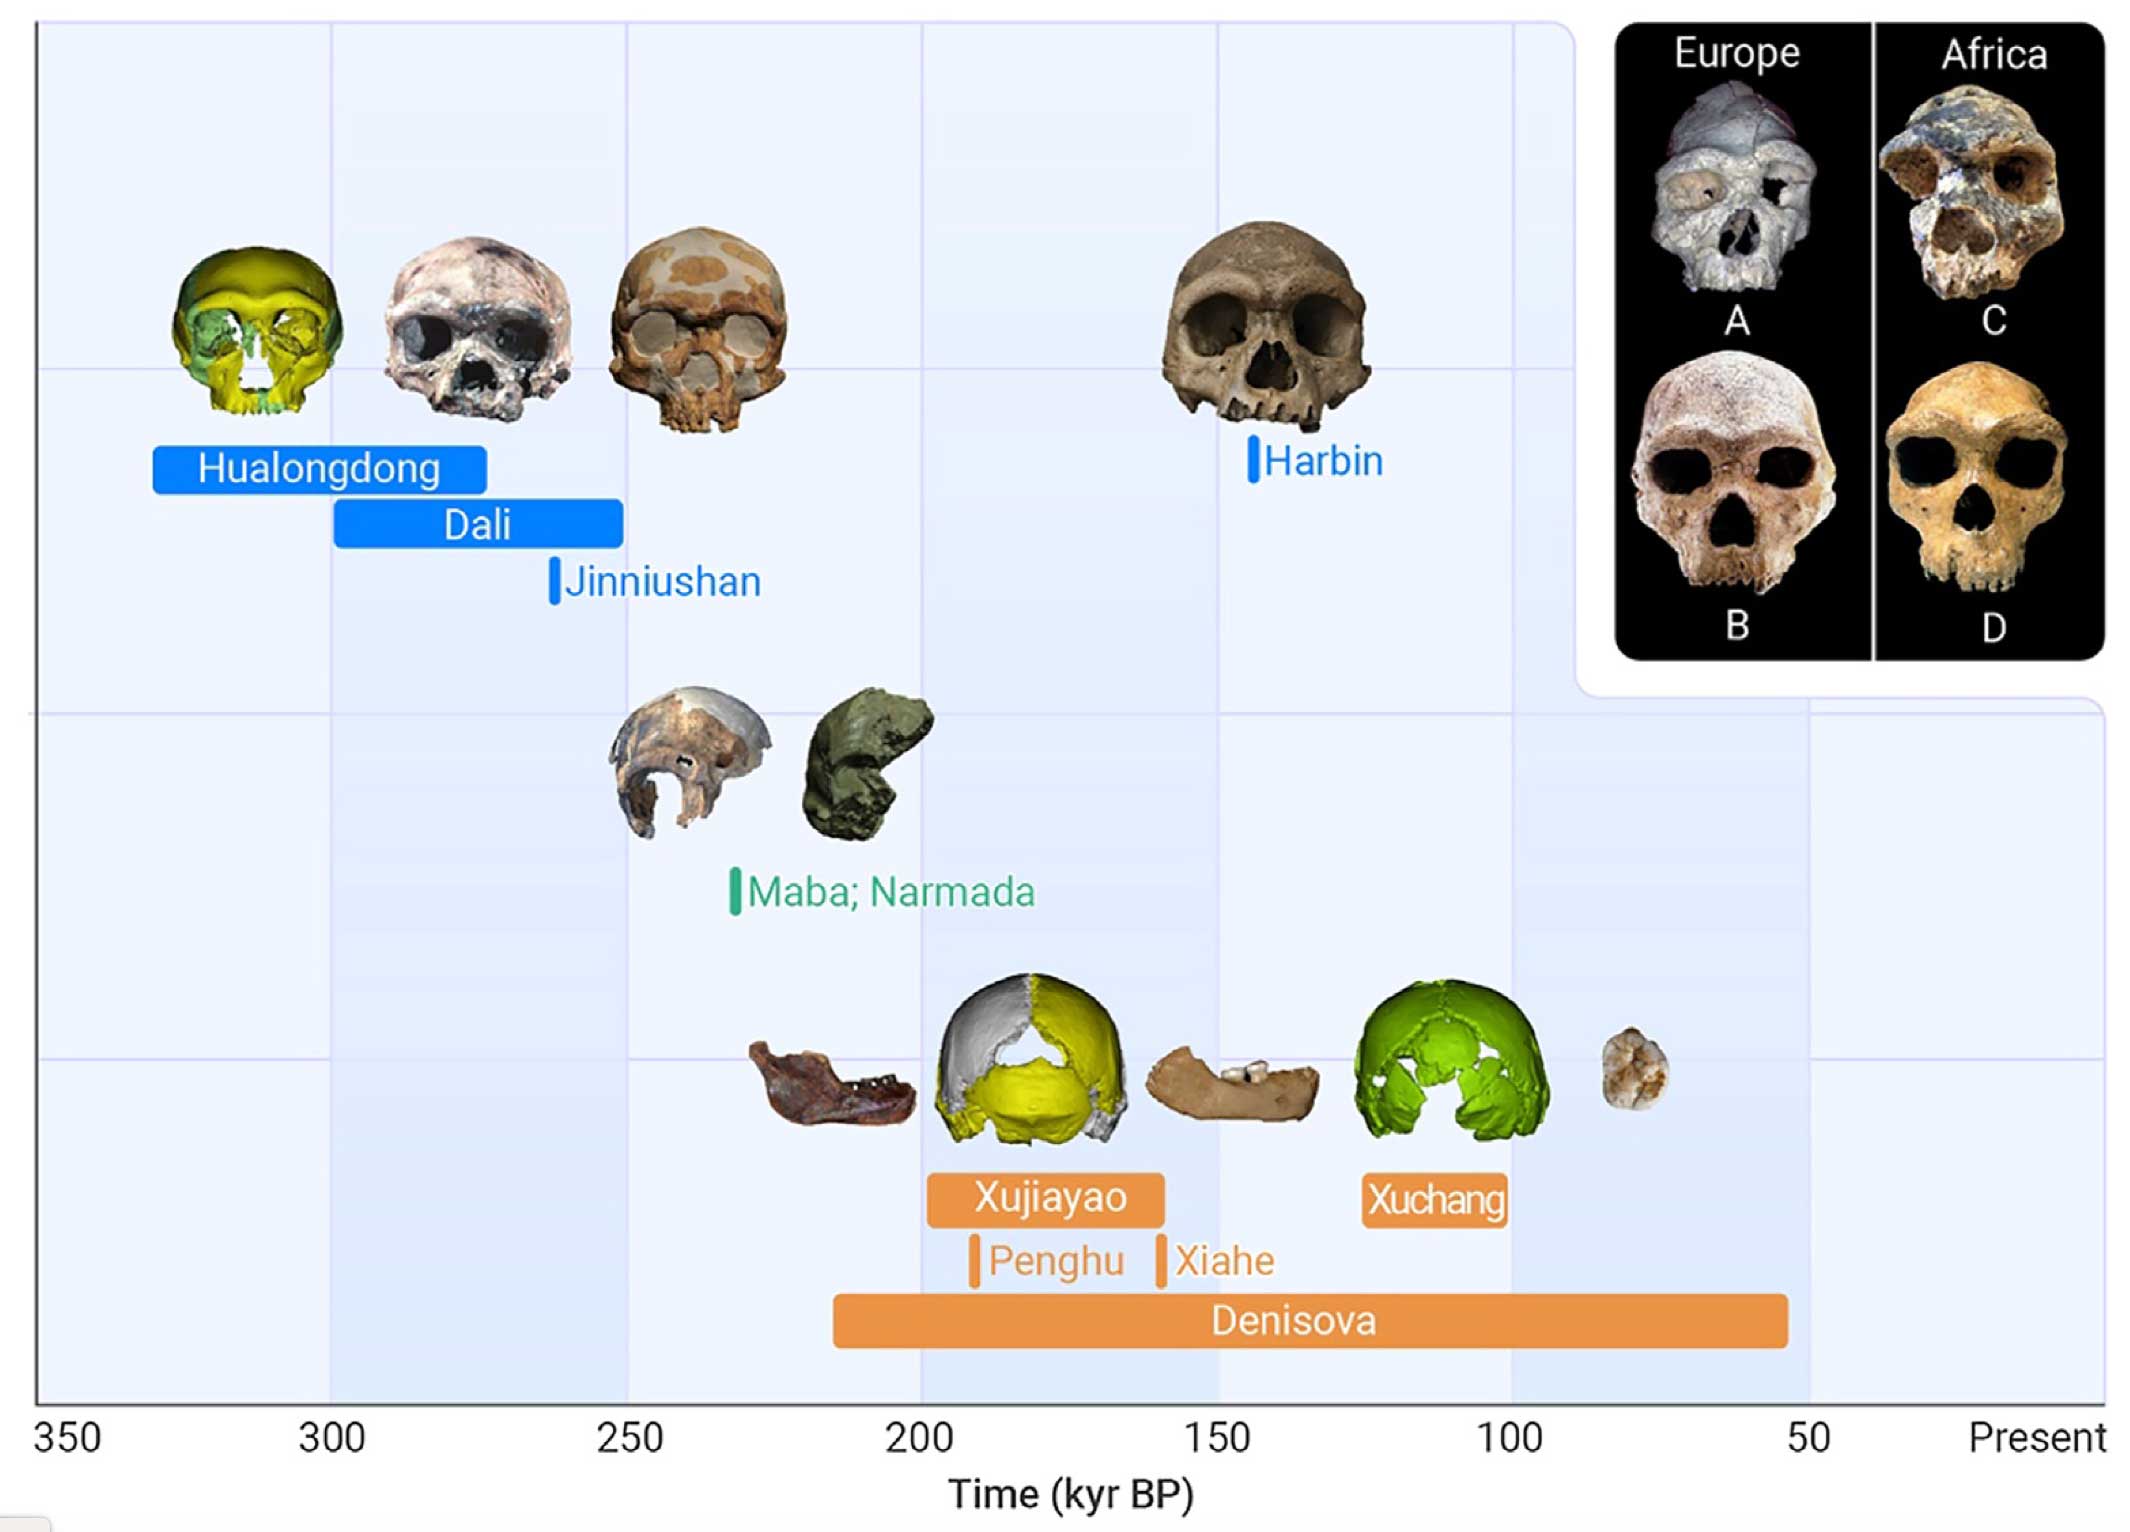 A timeline from 350,000 years ago to the present, with three groups of fossils indicated: one with Hualongdong, Dali, Jinniushan, and Harbin, one with Maba and Narmada, and one with Xujiayao, Xuchang, Penghu, Xiahe, and Denisova